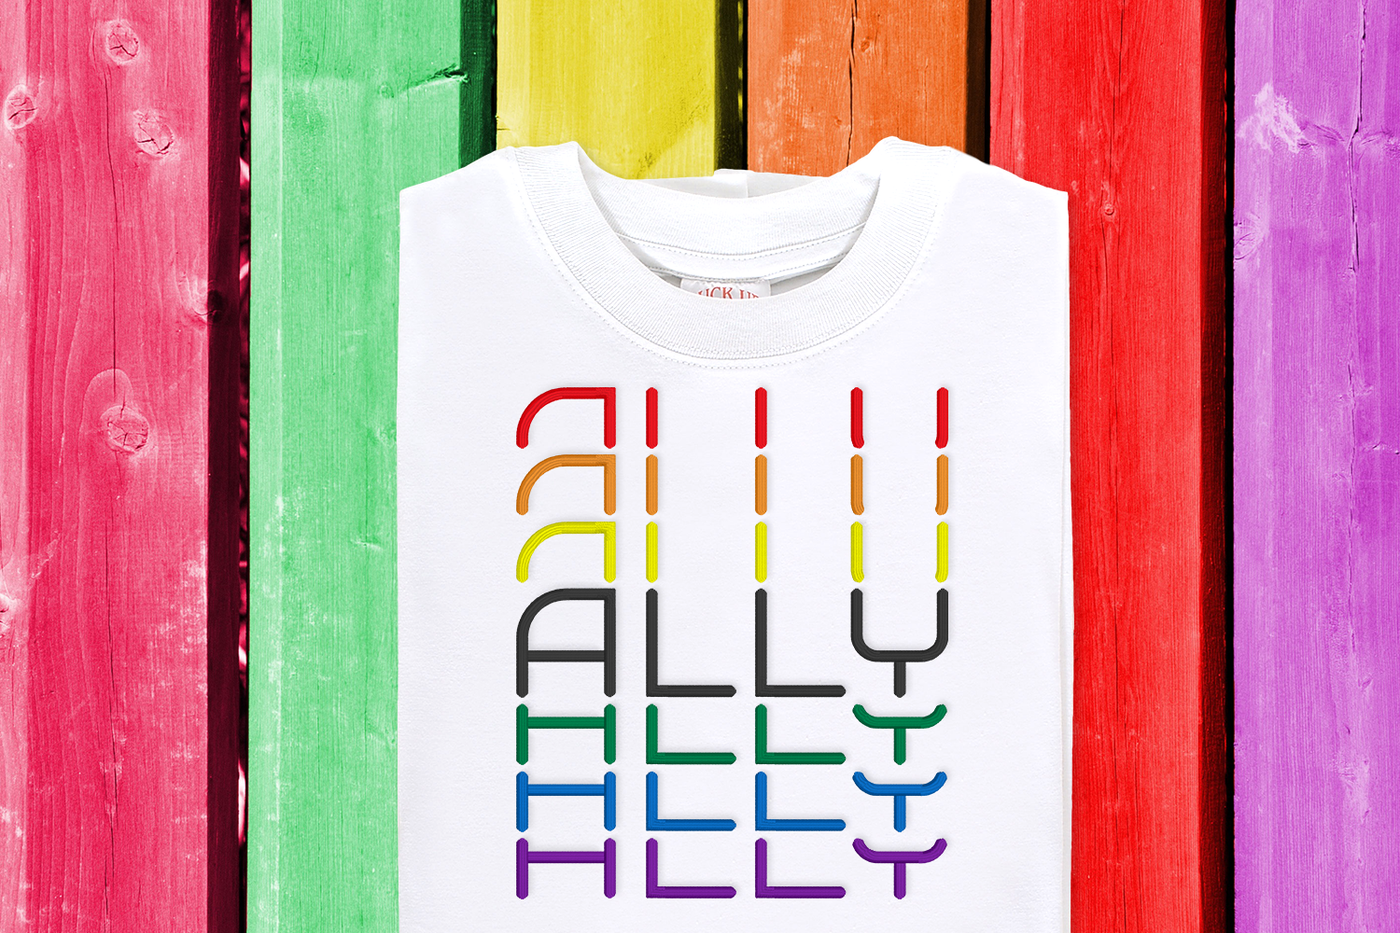 Ally embroidery design with stacked text. Shown on a white shirt laying on a rainbow painted wood background.